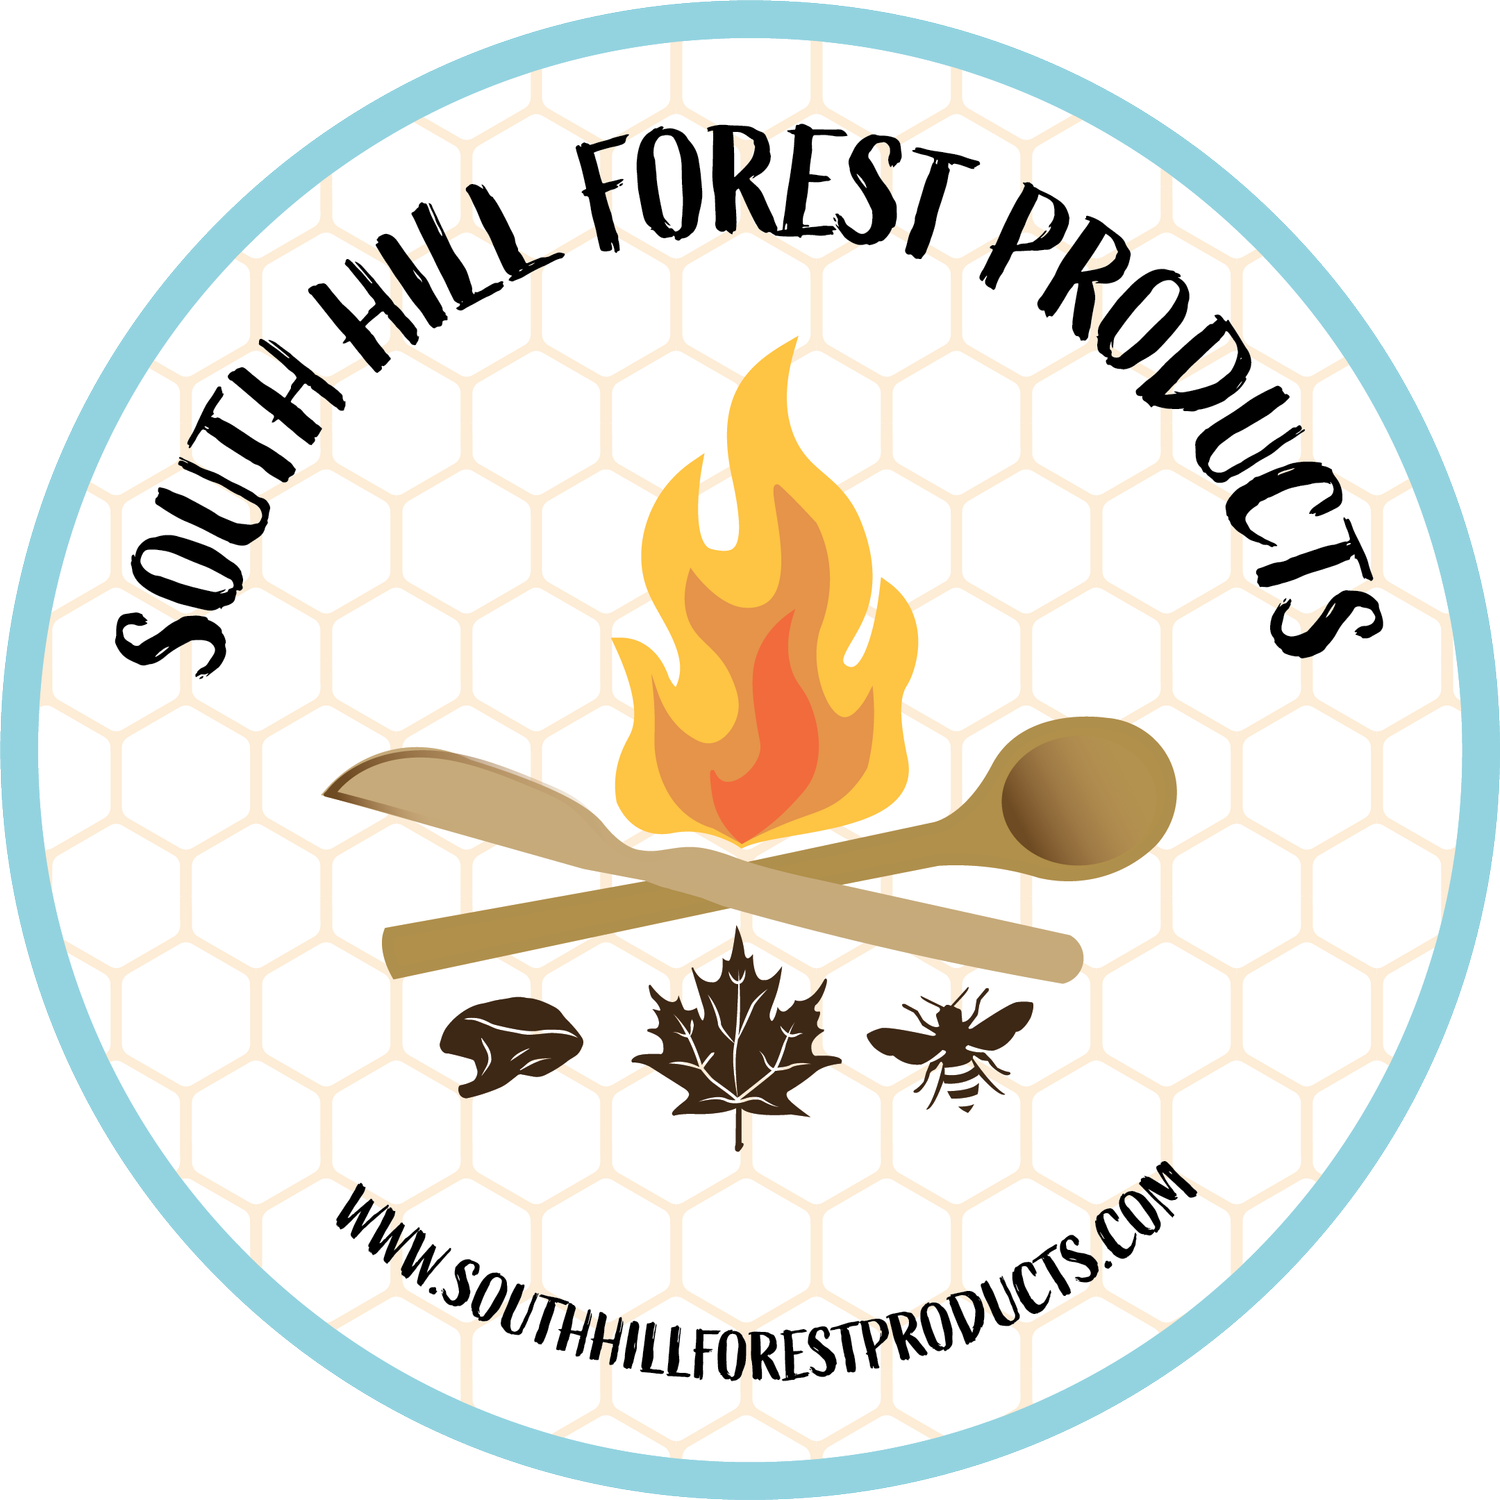 South Hill Forest Products